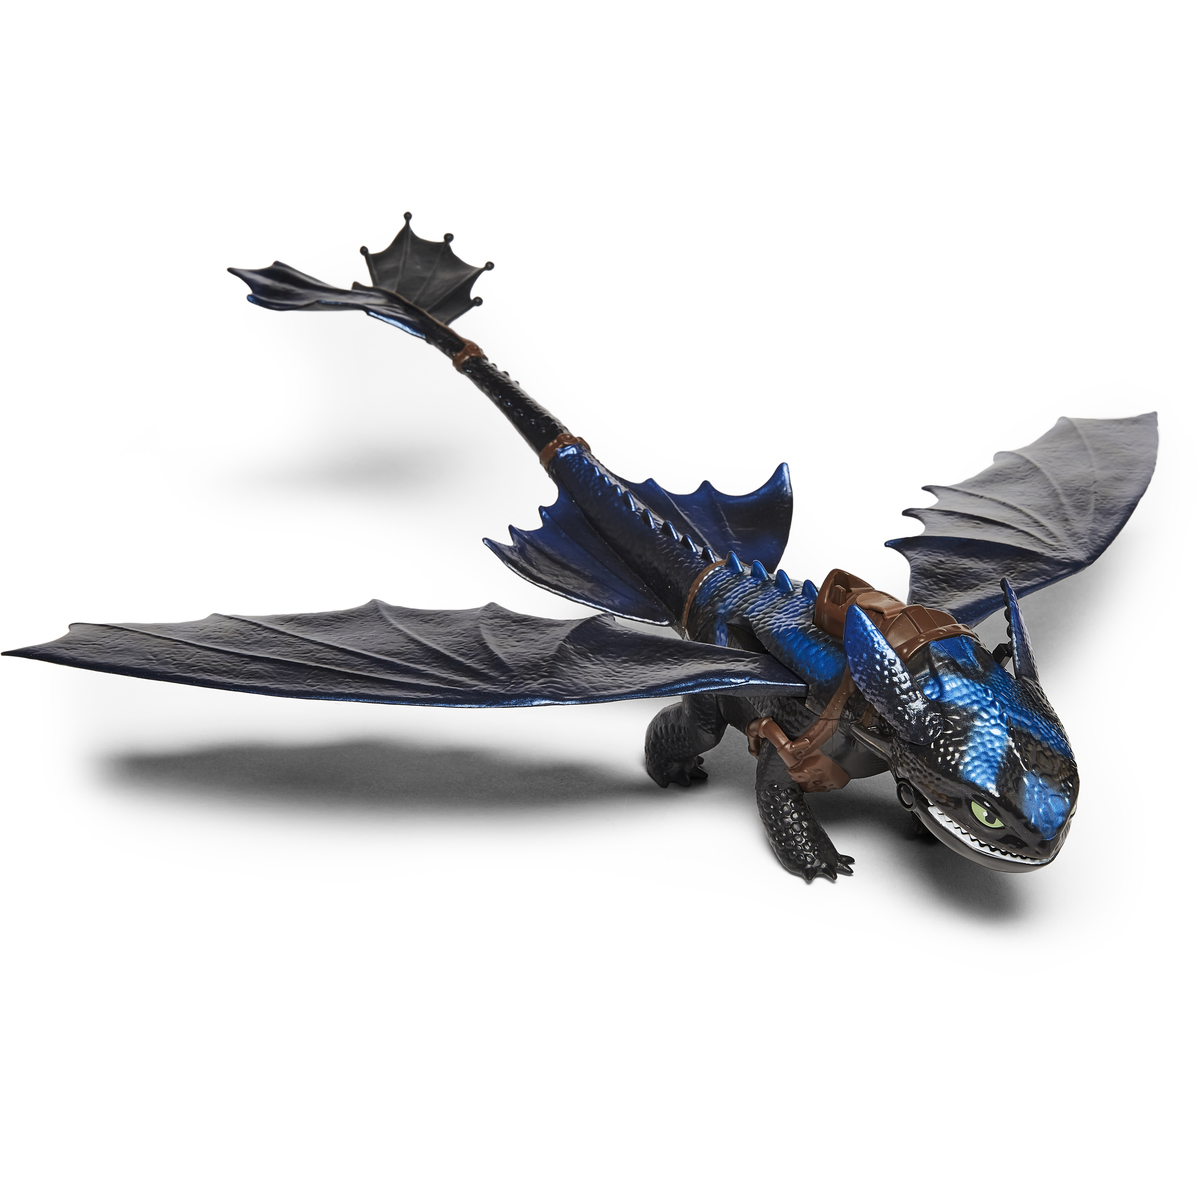 dreamworks dragons giant fire breathing toothless